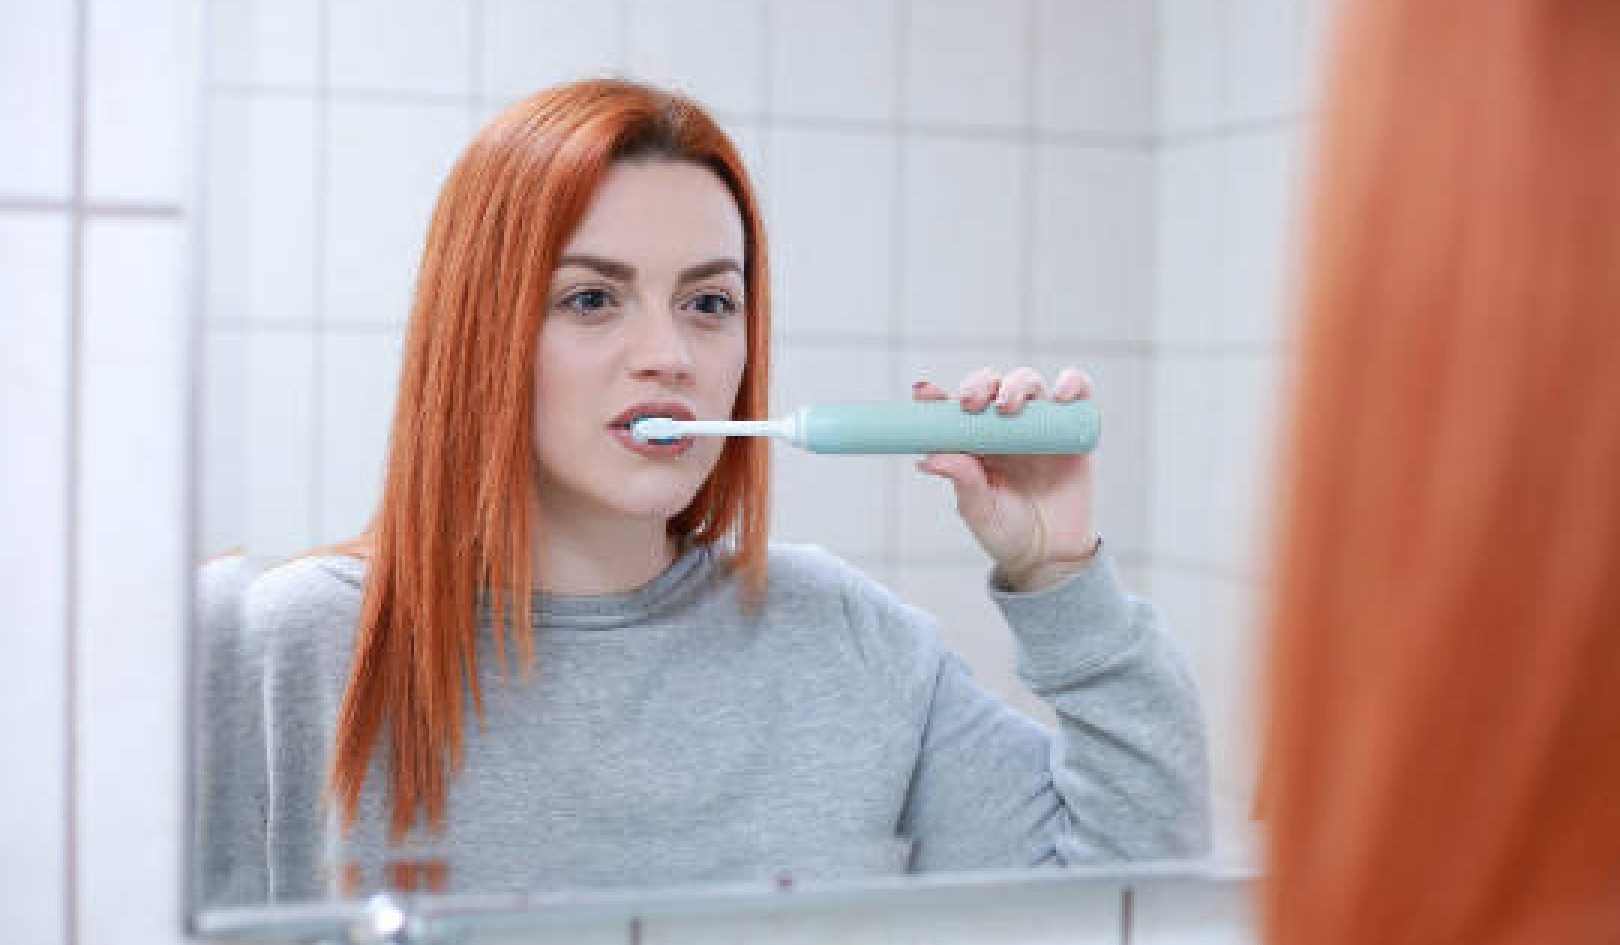 Brushing Your Teeth As An Intuition-Building Mindfulness Exercise